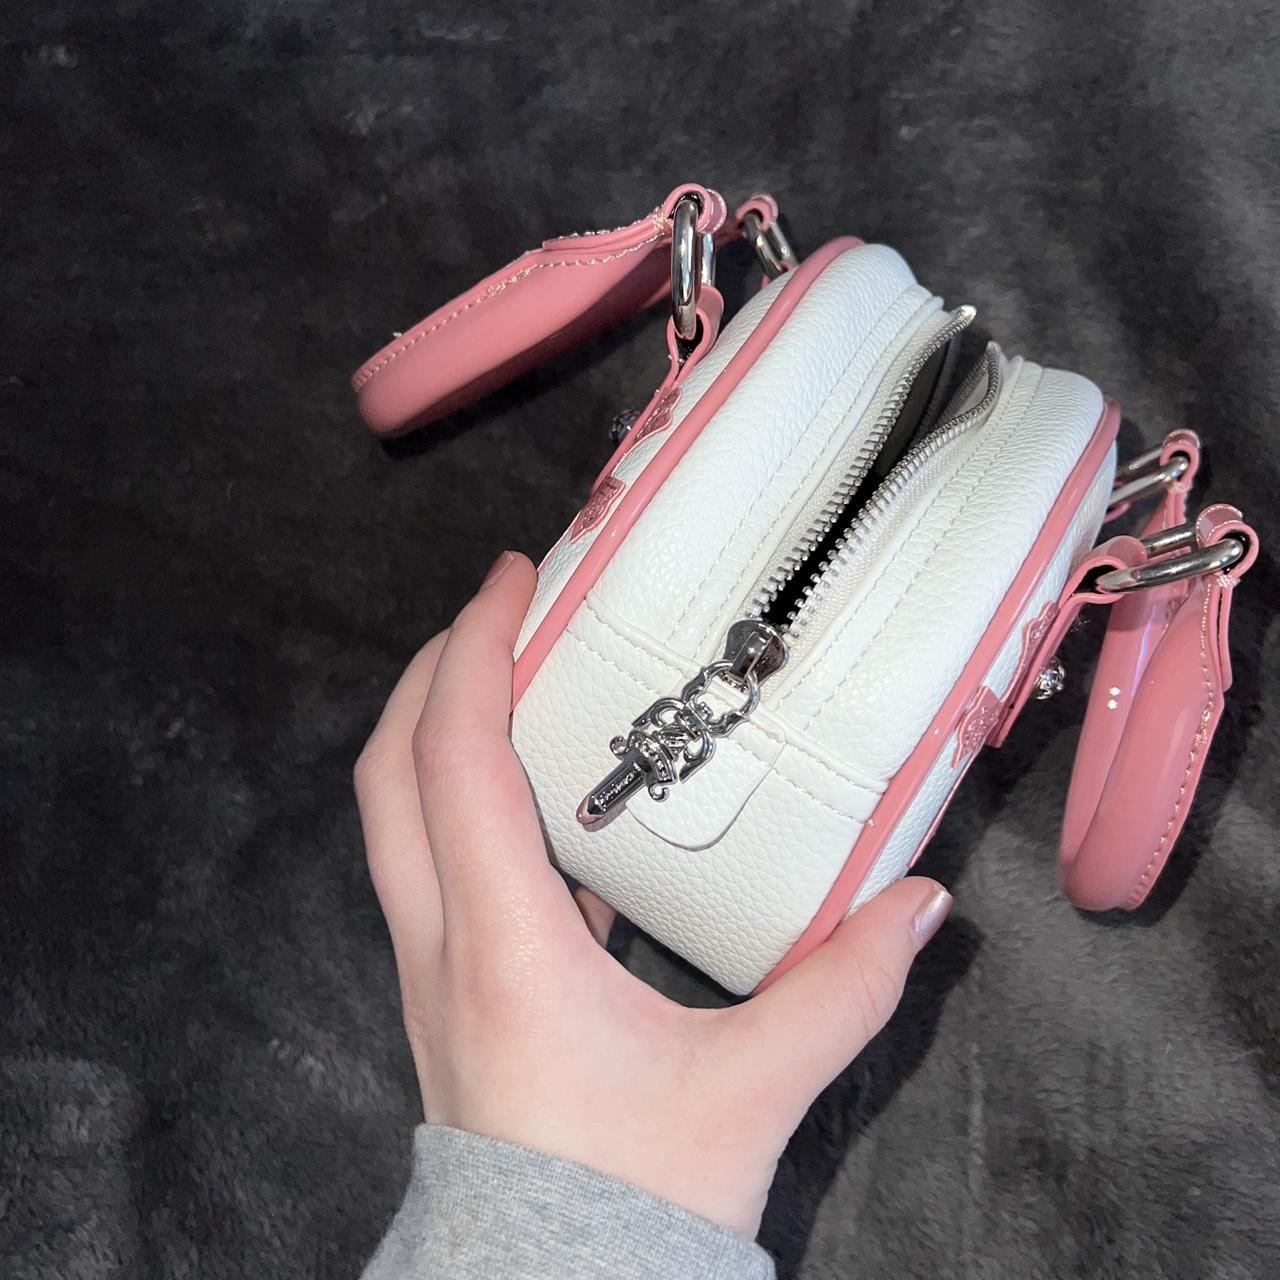 Women's Pink and White Bag (4)